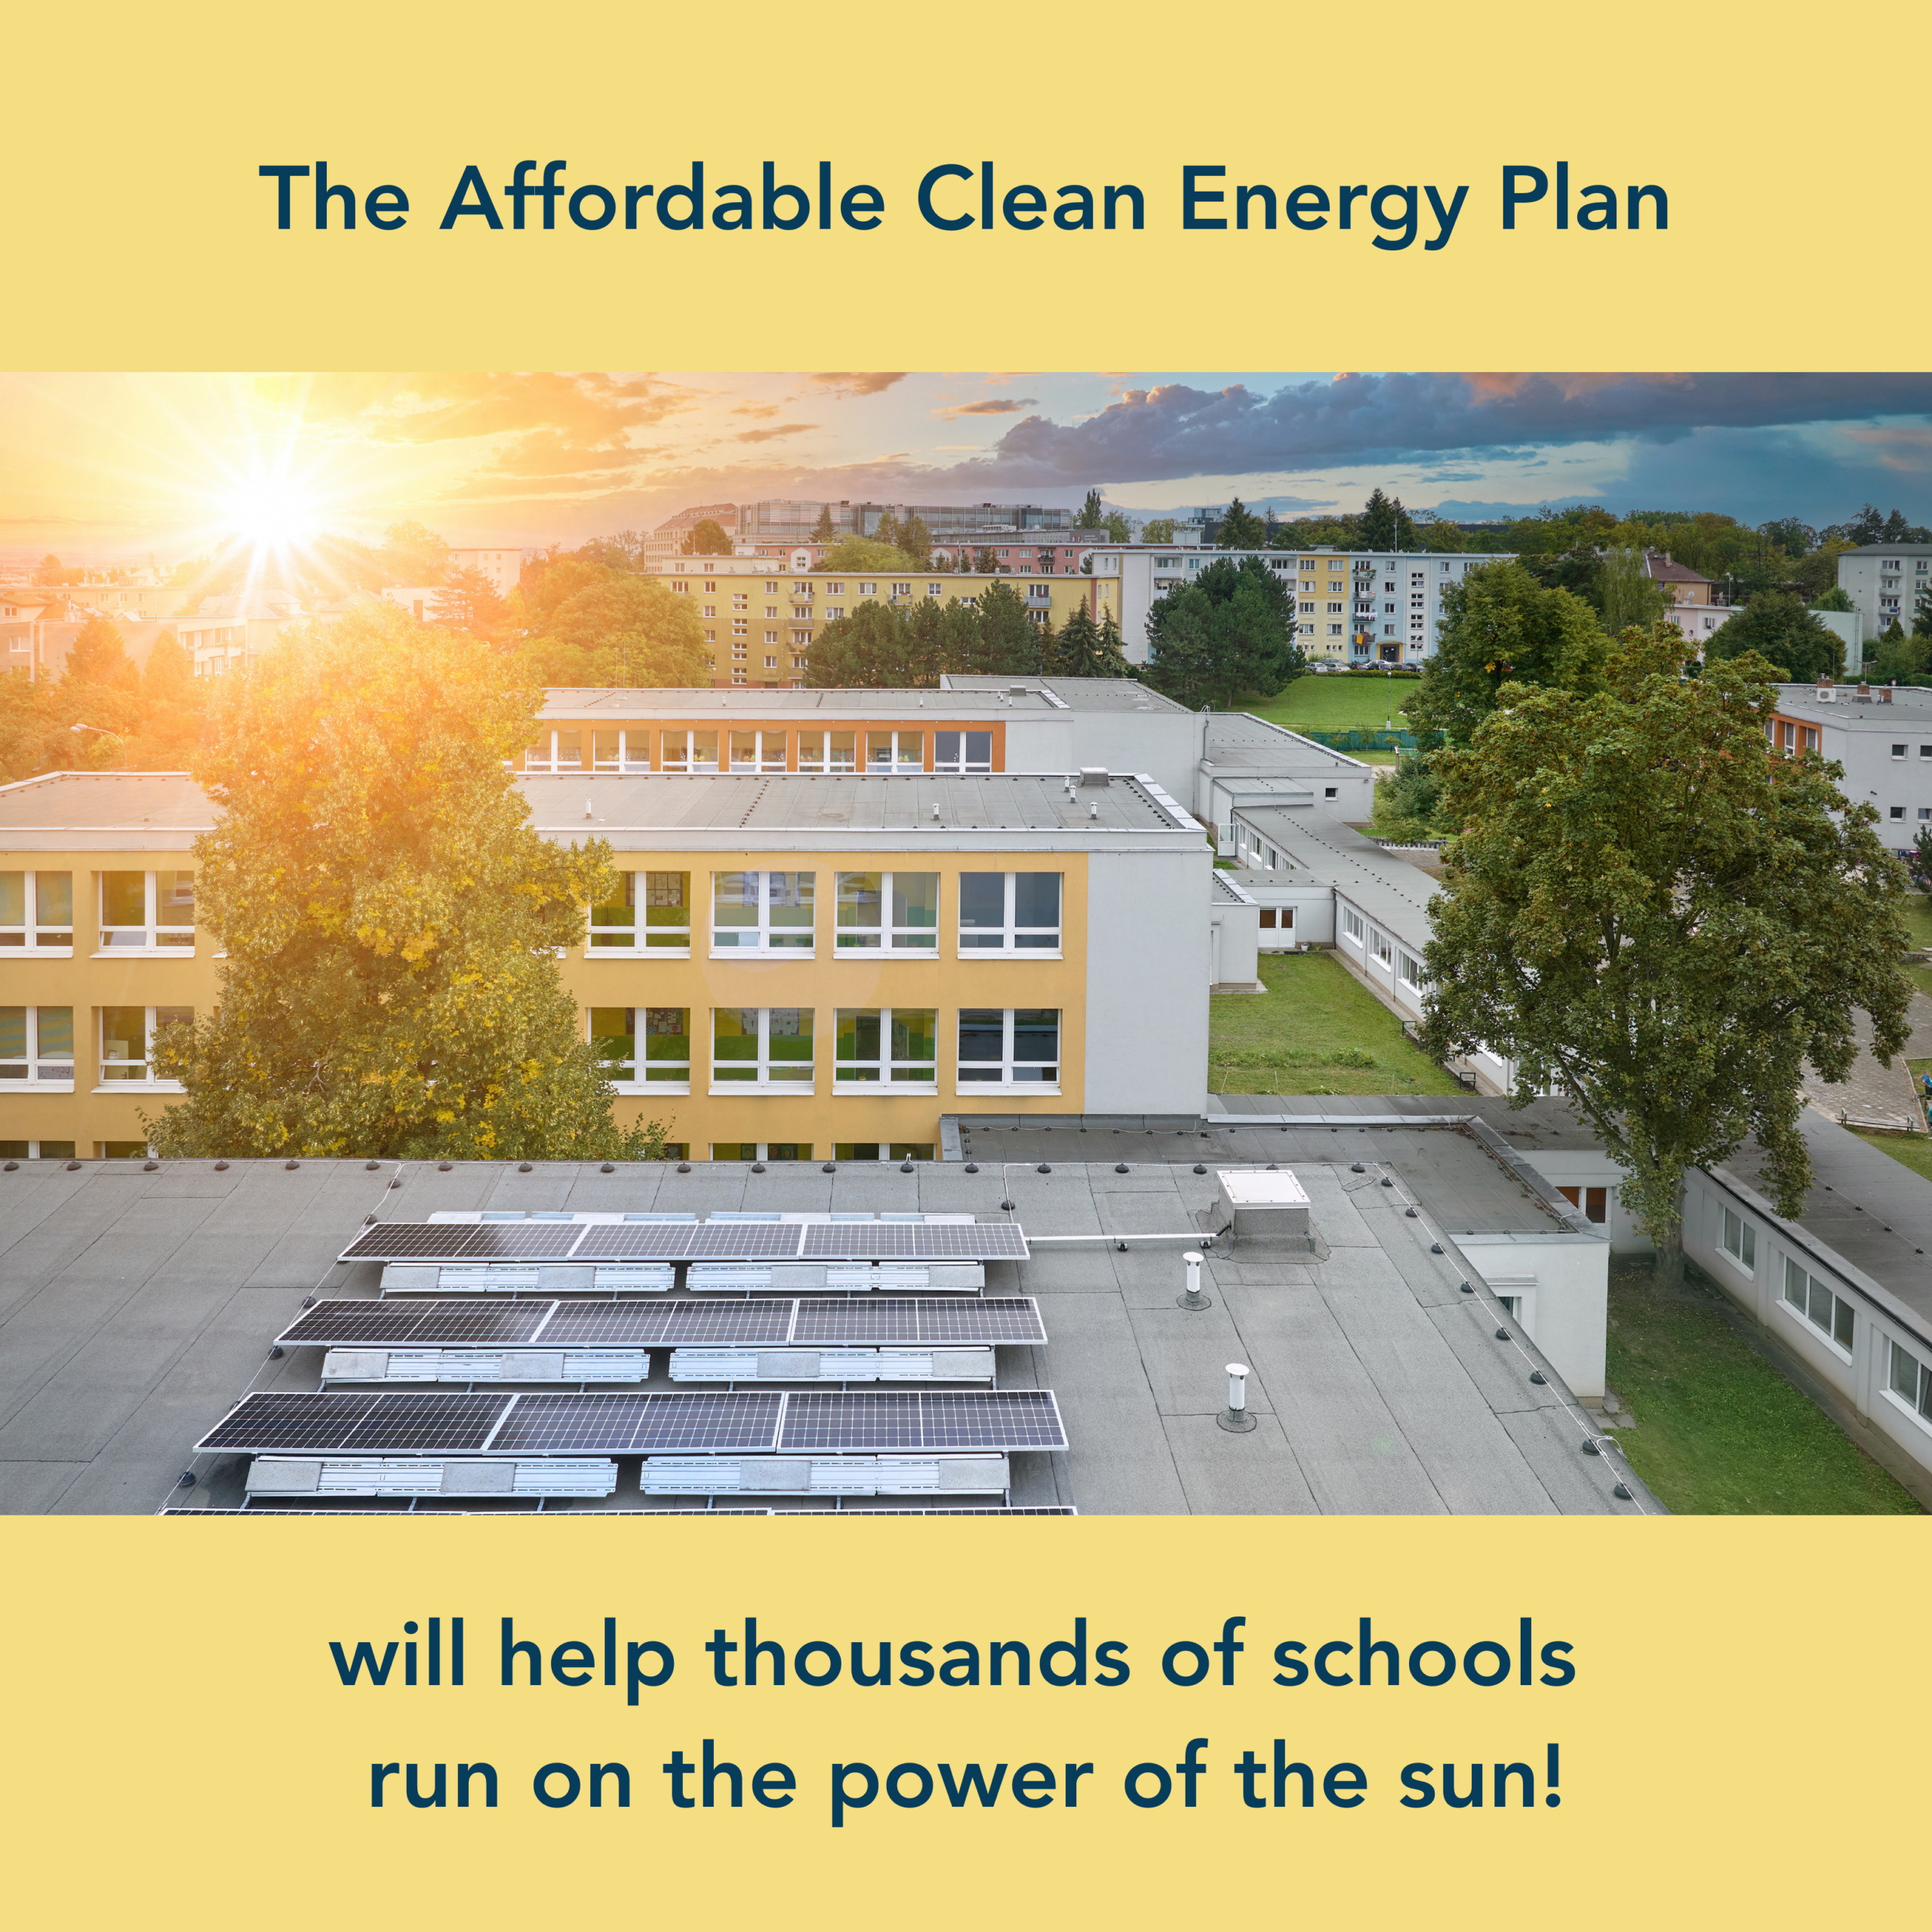 A yellow graphic about solar energy. In the center of the graphic is a photo of a school with solar panels in the foreground. There is text that reads 